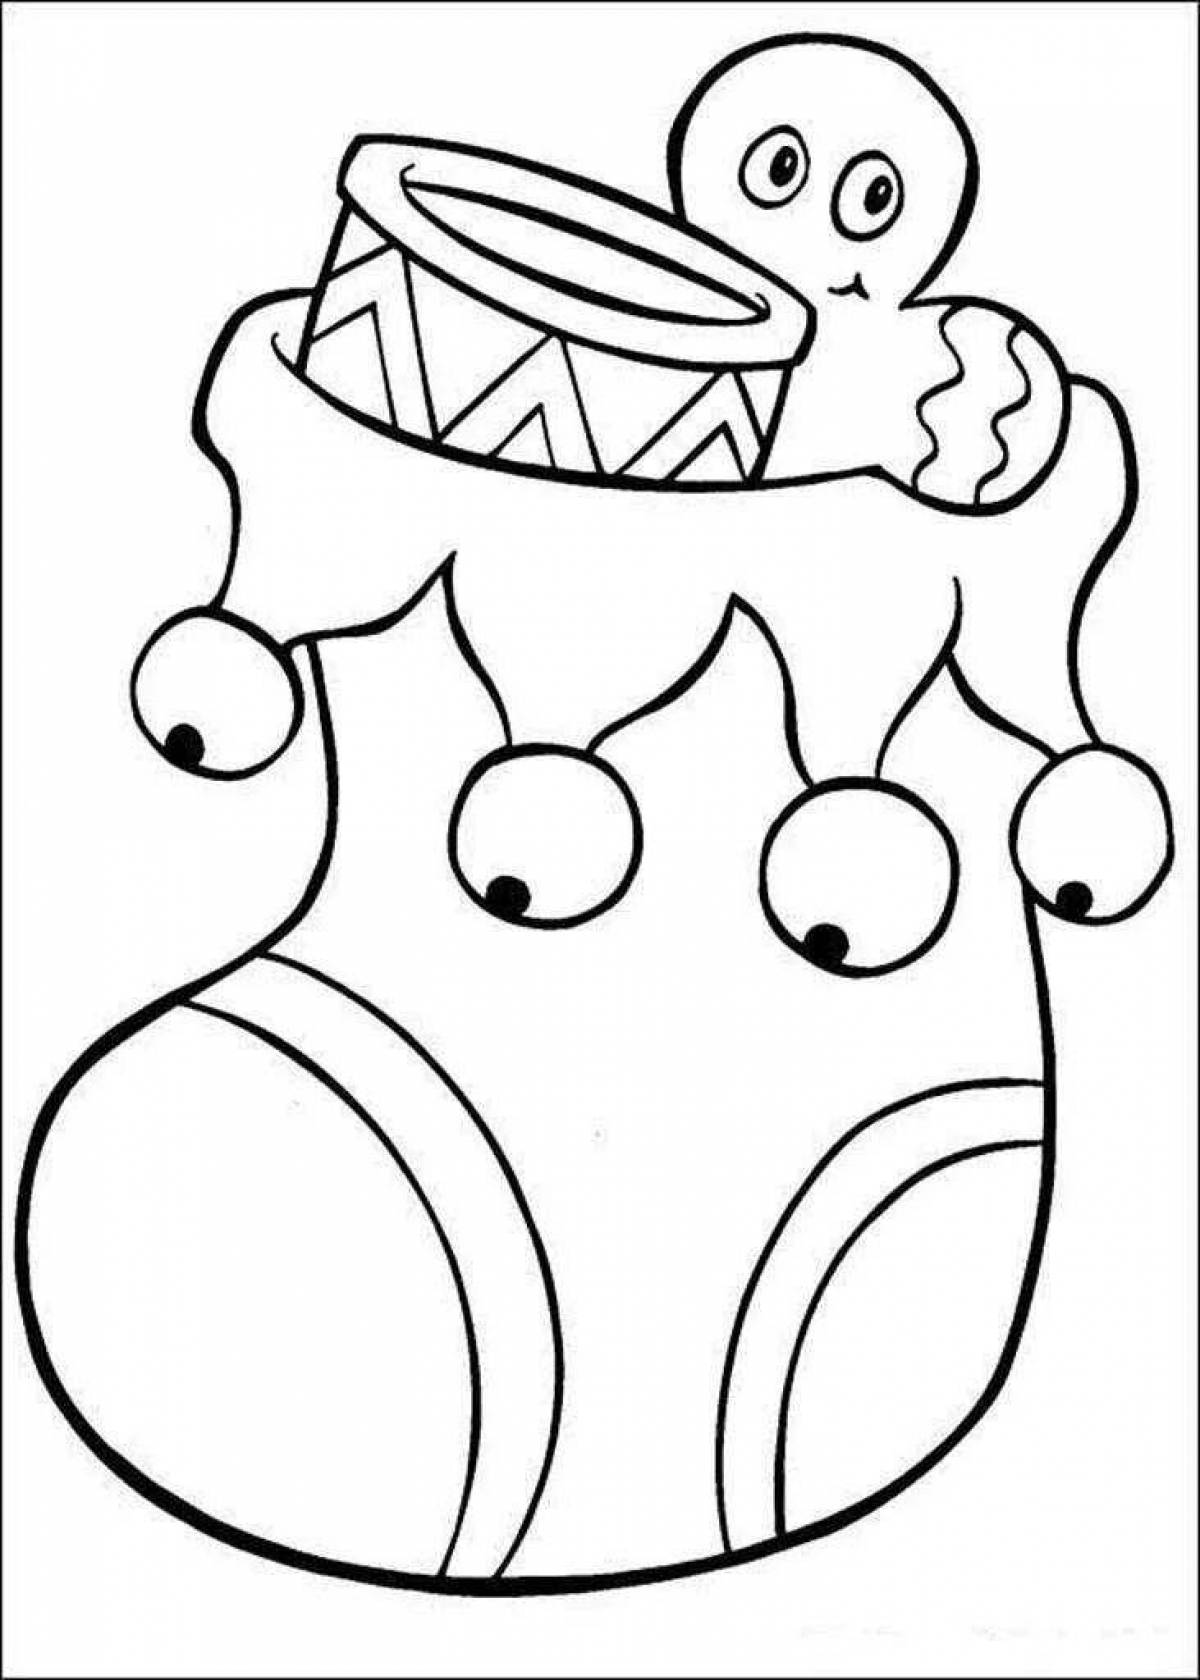 Amazing Christmas toys coloring book